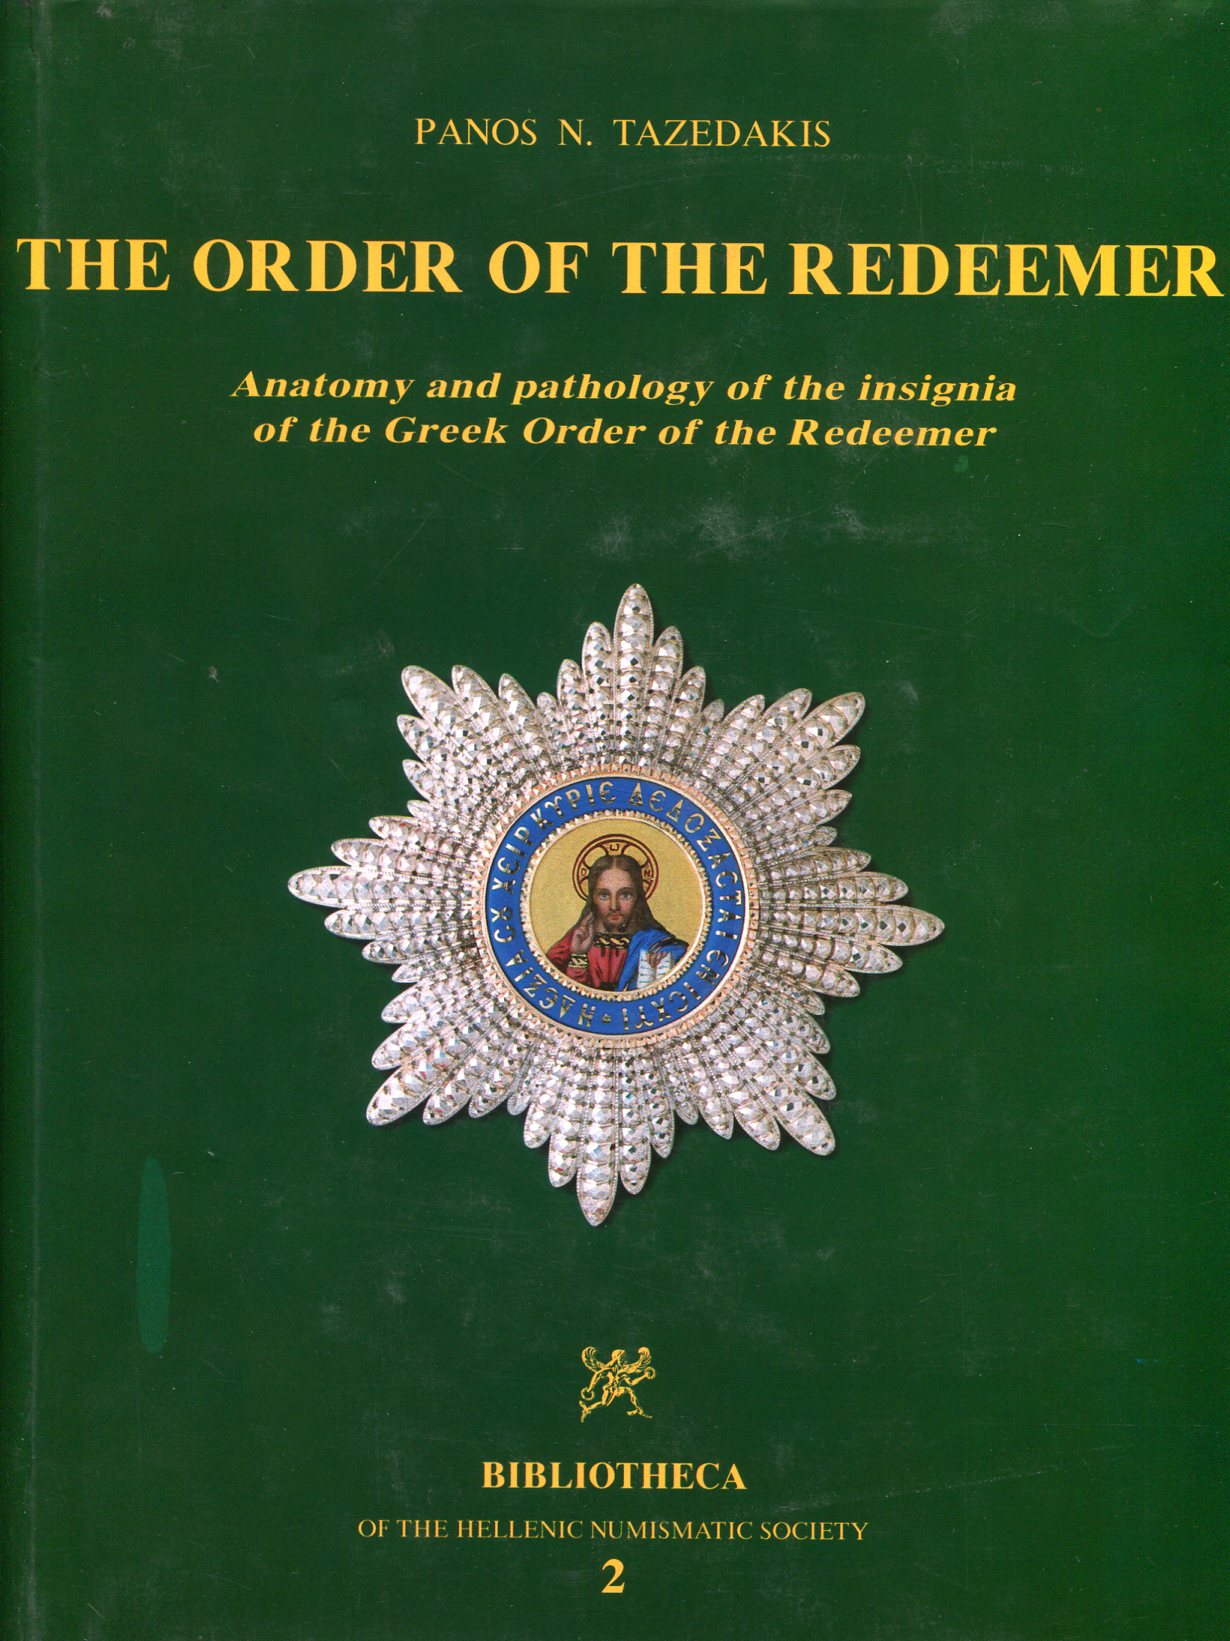 THE ORDER OF THE REDEEMER: ANATOMY AND PATHOLOGY OF THE INSIGNIA OF THE GREEK ORDER OF THE REDEEMER